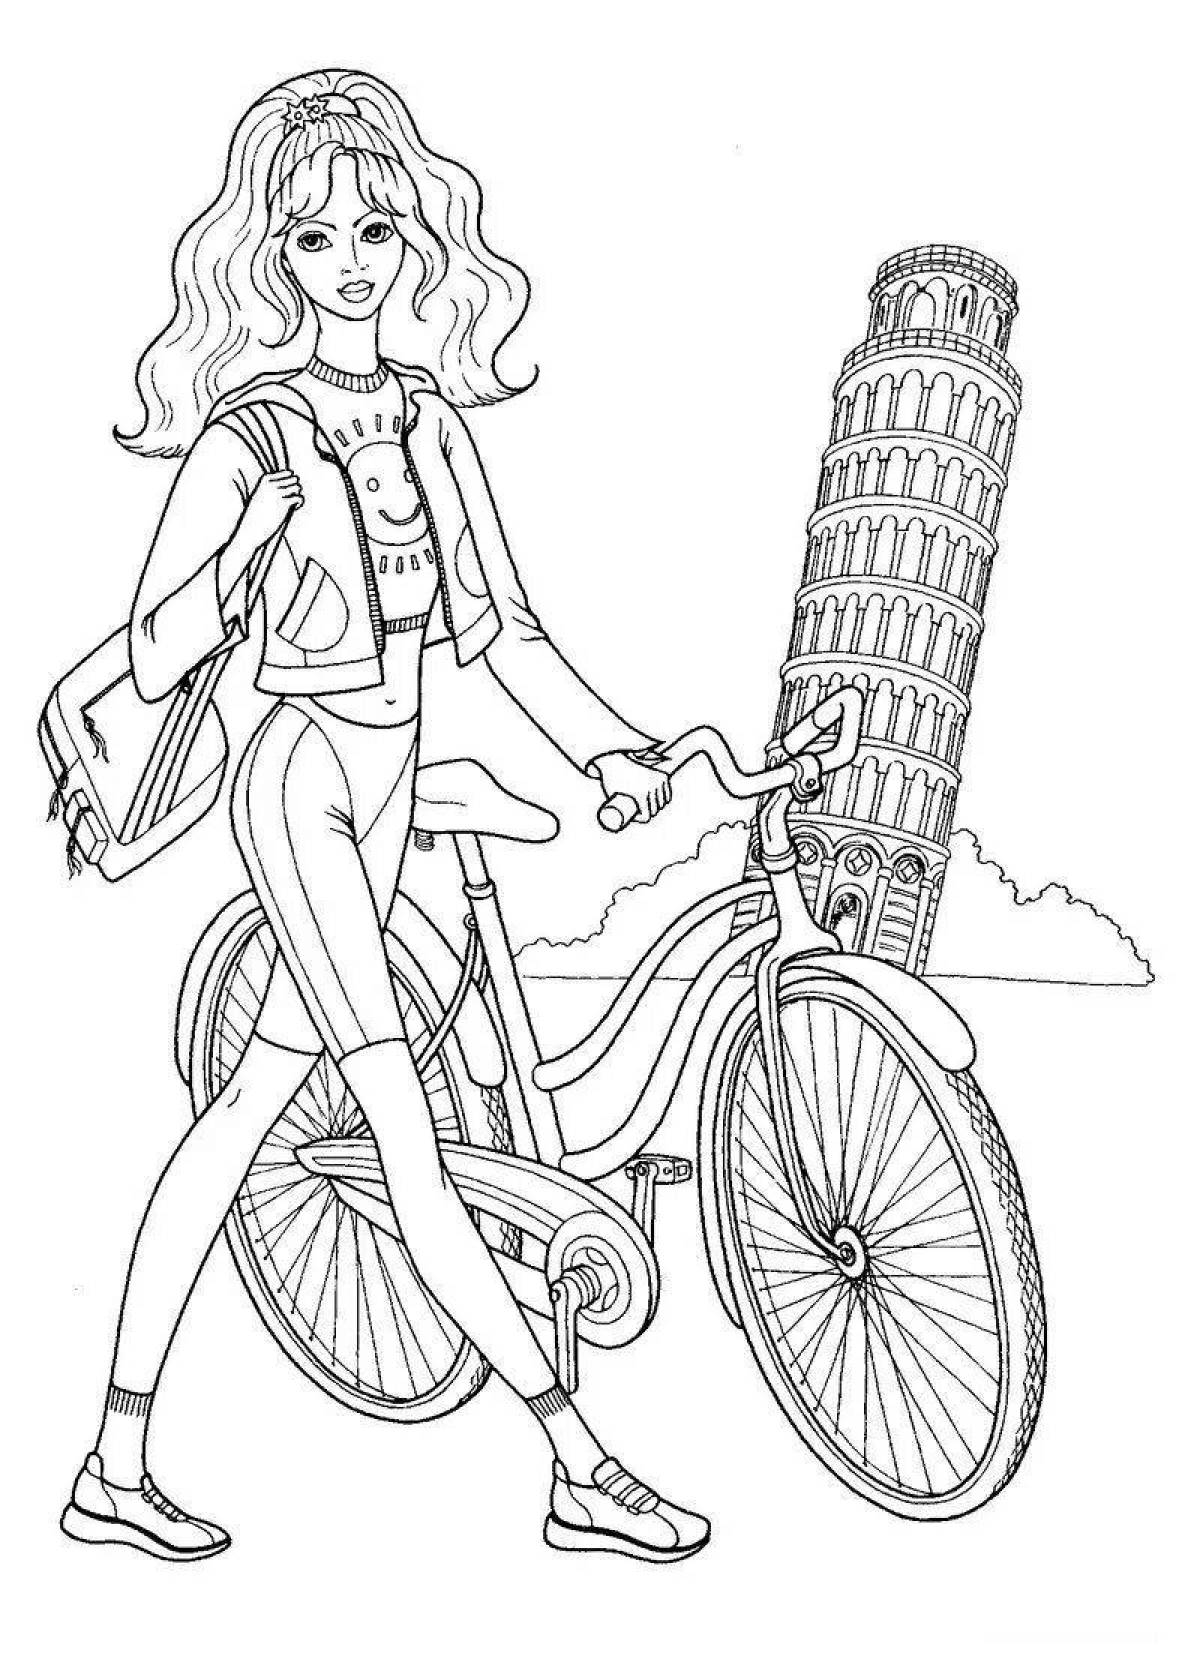 An energetic girl on a bicycle